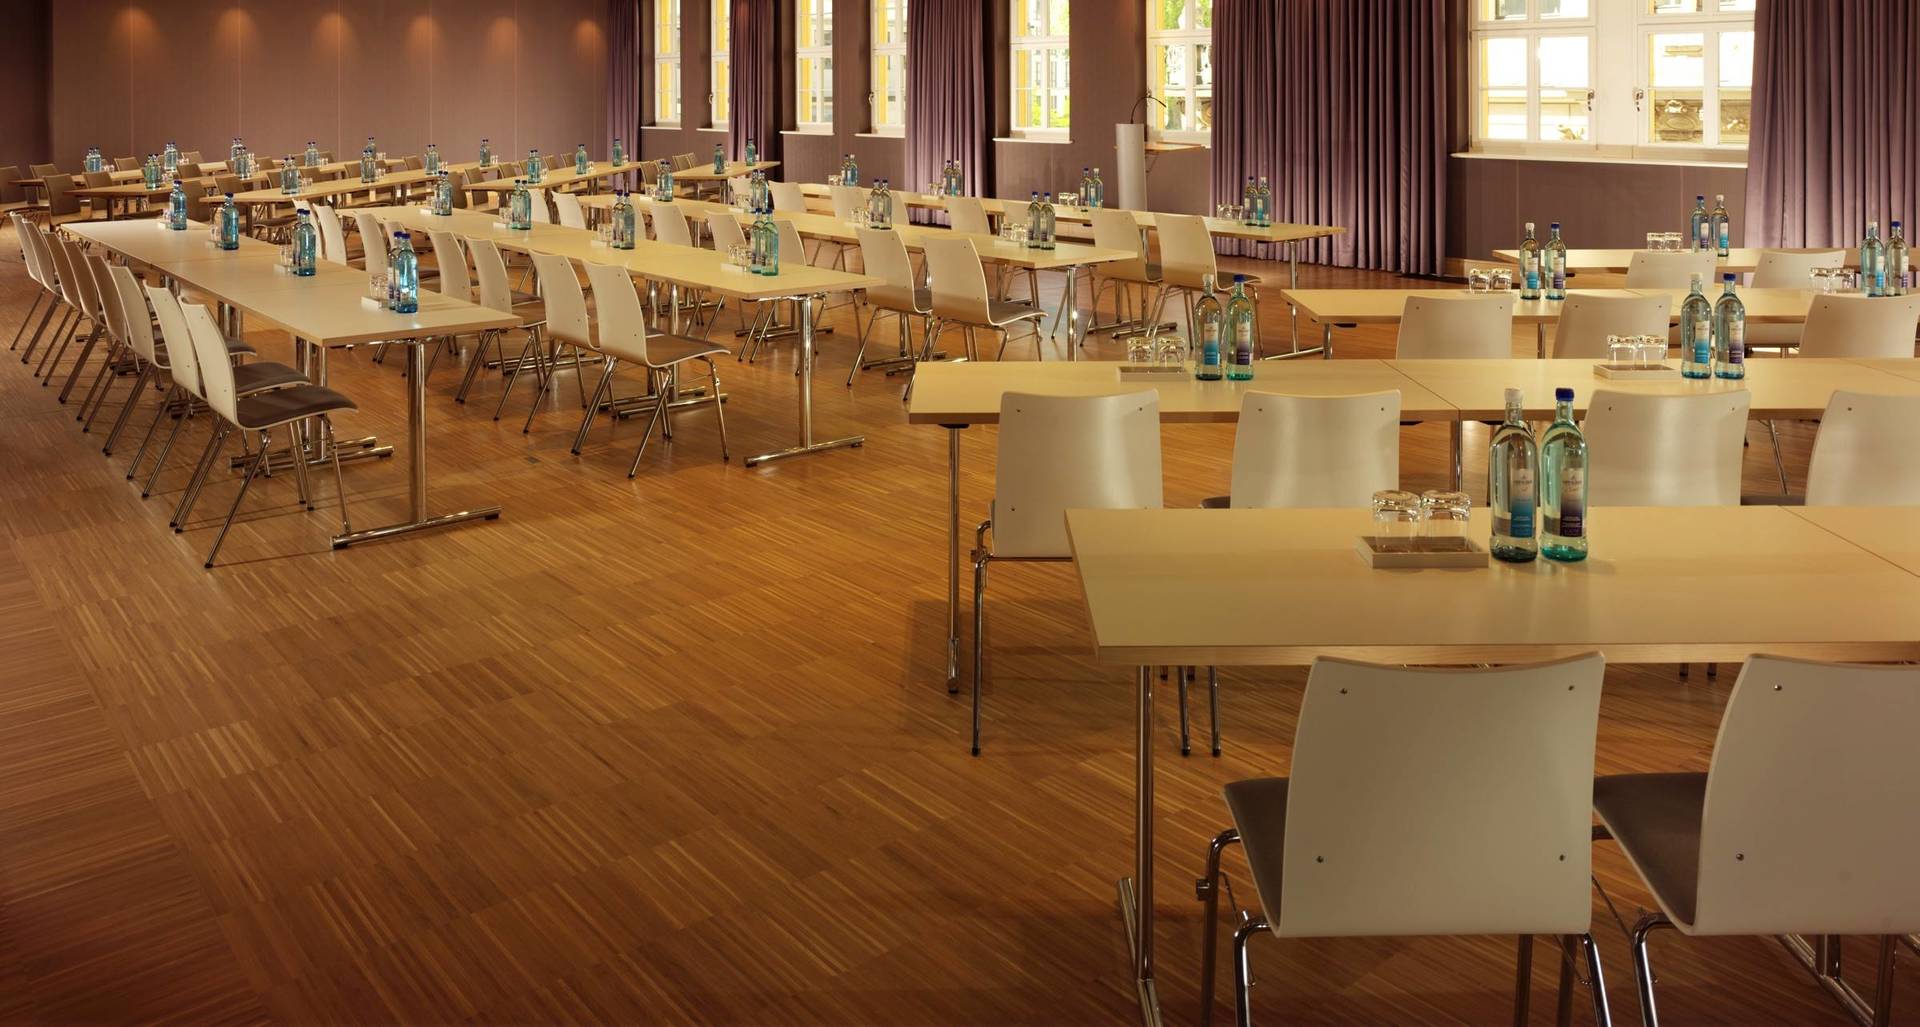 Large meeting rooms at the Hyperion Hotel Dresden - Official website